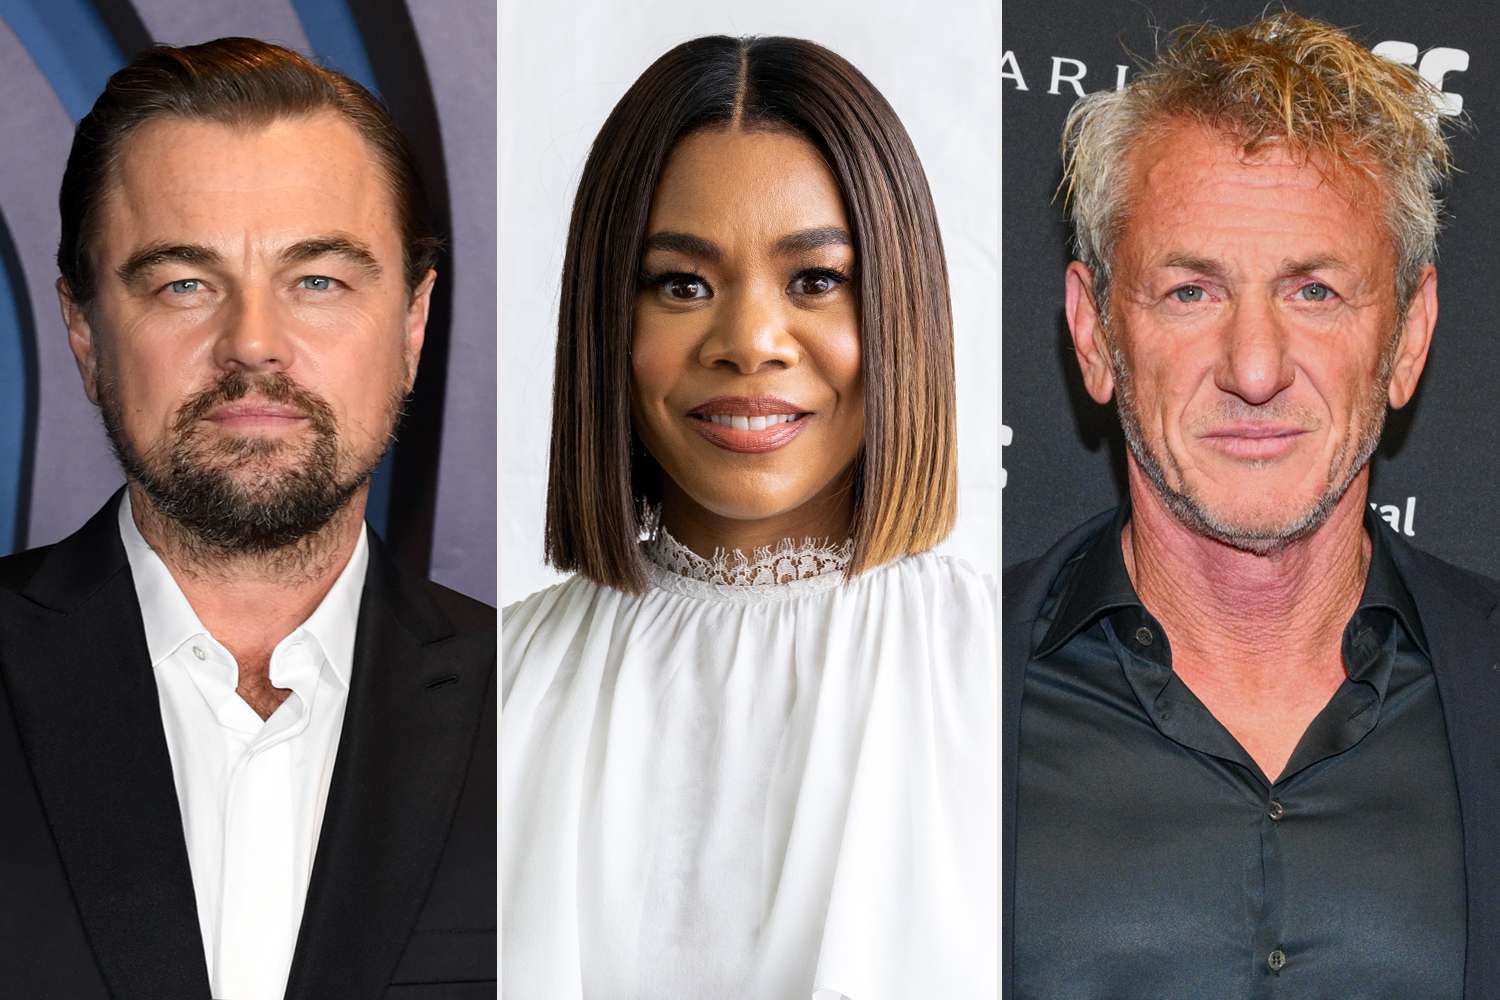 Leonardo DiCaprio Spotted Filming Diner Scene With Regina Hall For New P.T. Anderson Movie